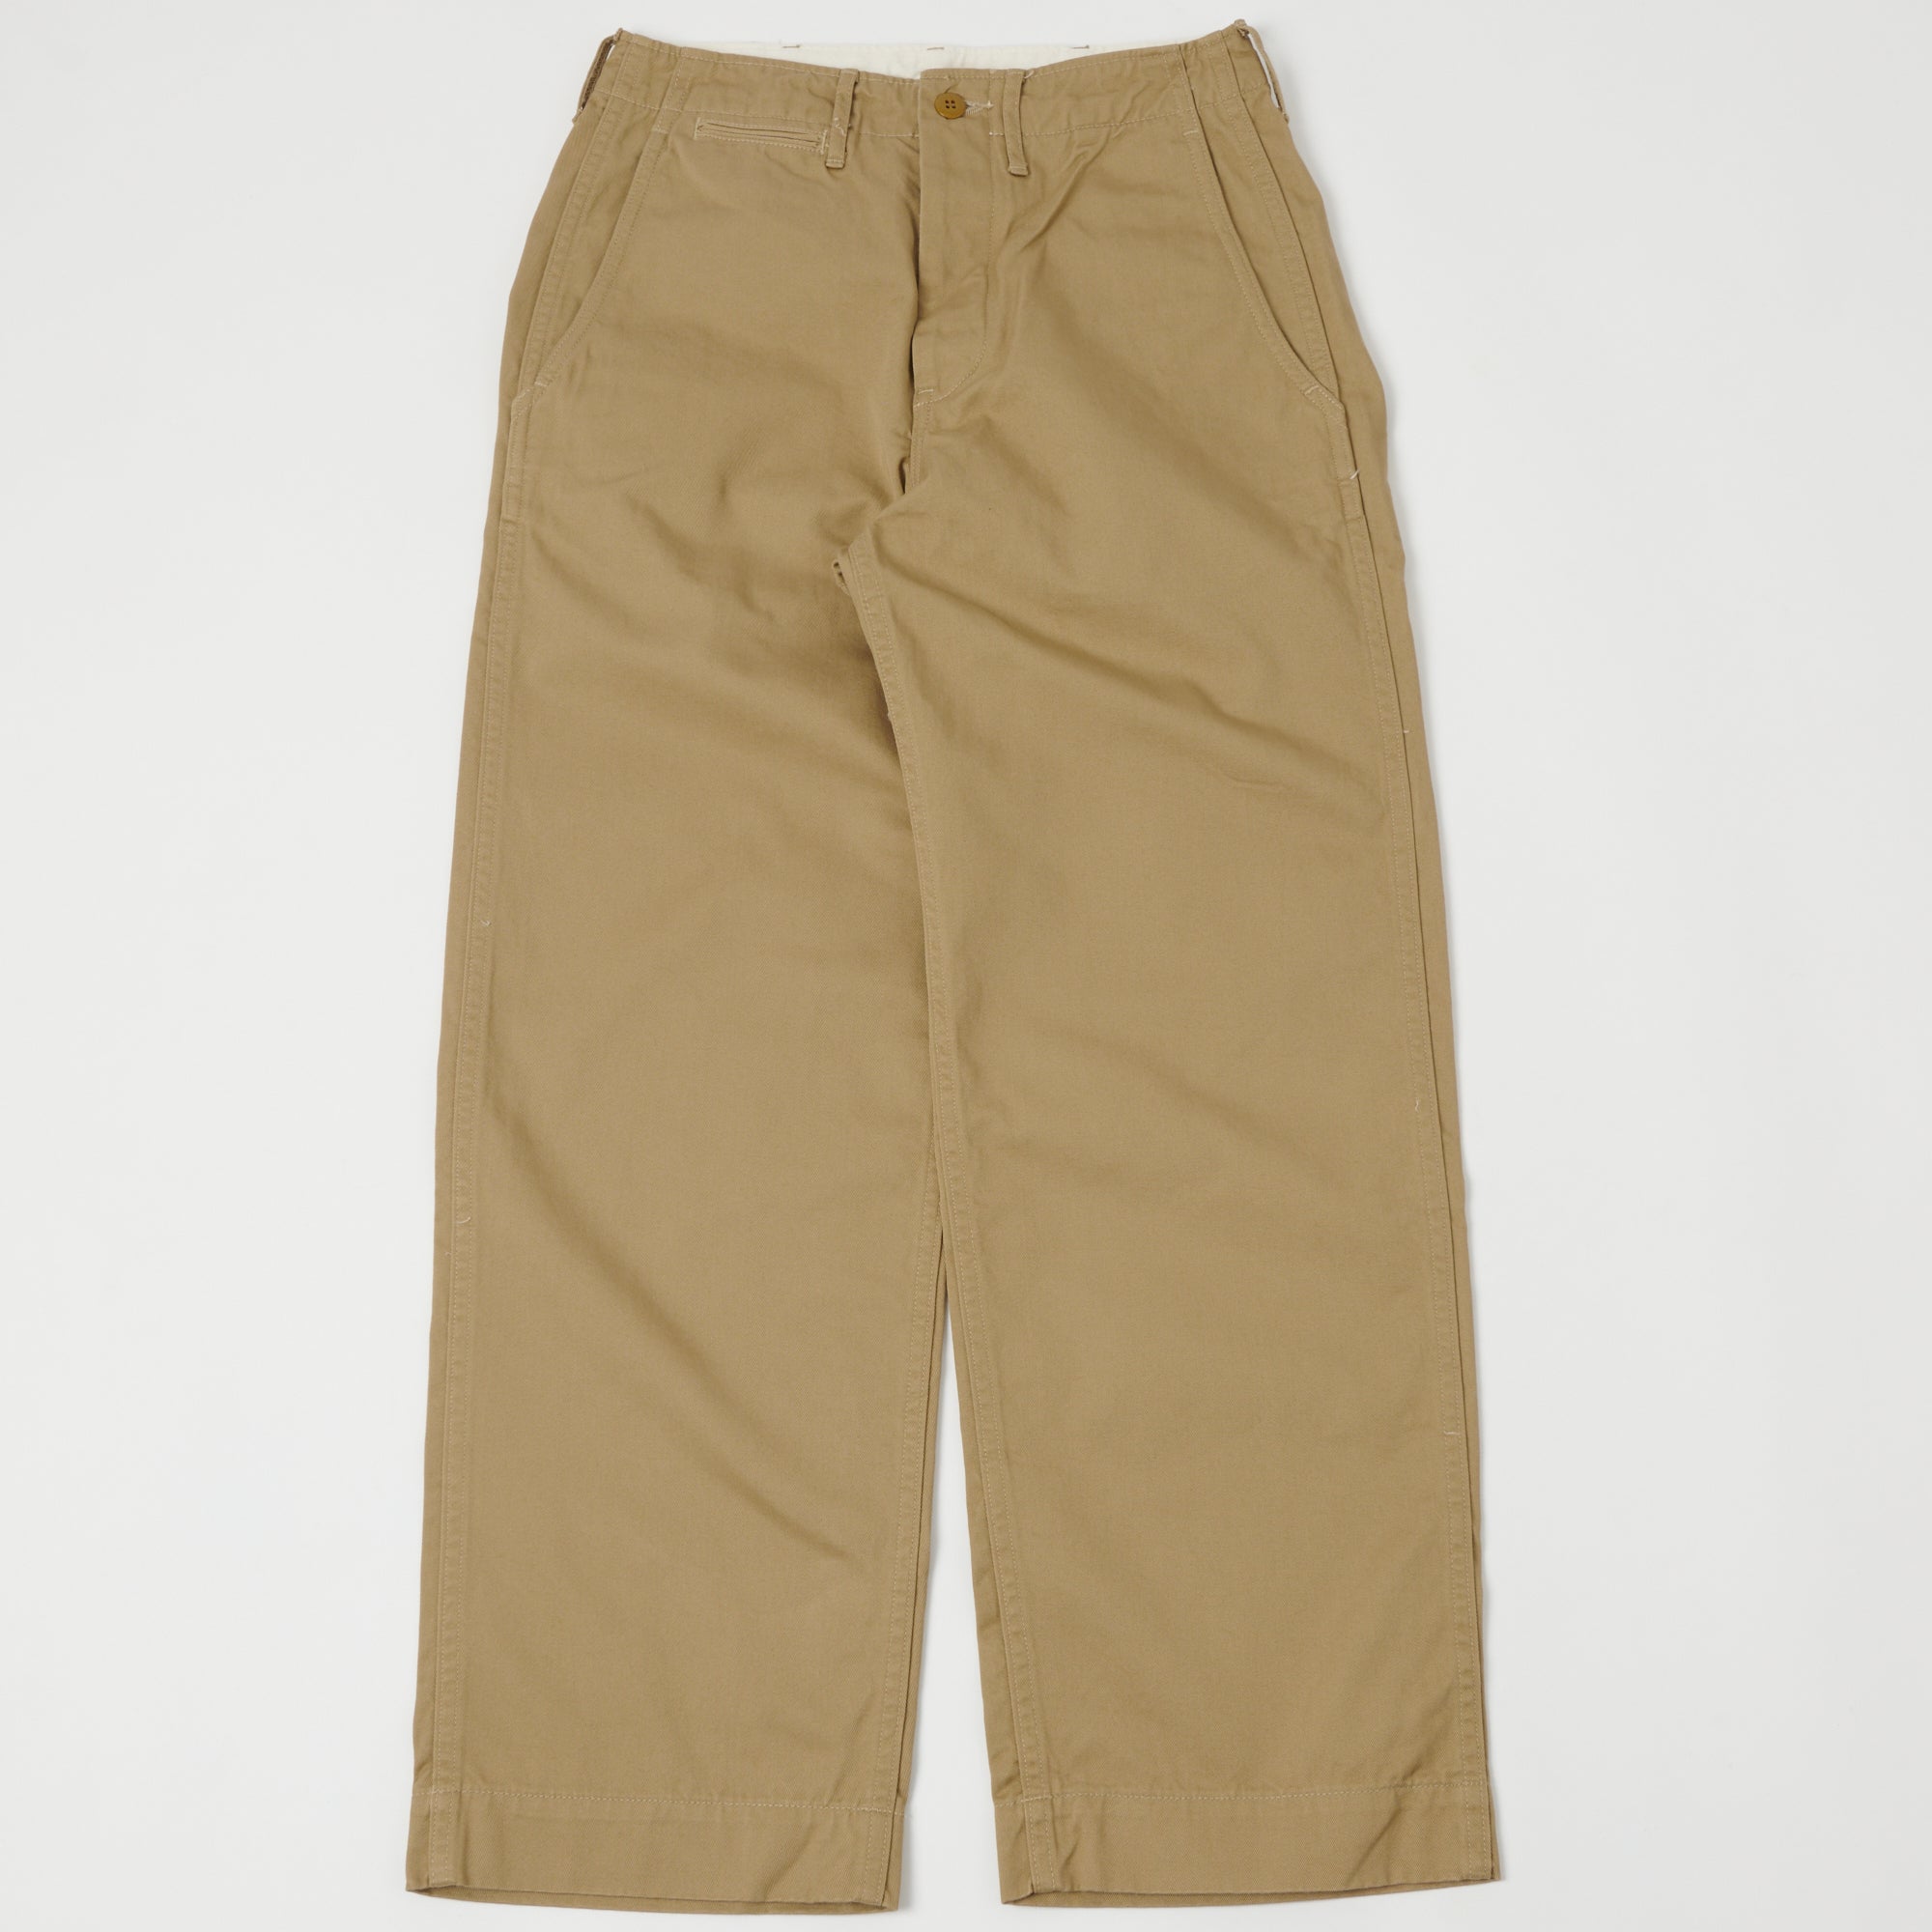 Full Count 1201 U.S. Army Combat Chino - Brown Beige | Son of a Stag